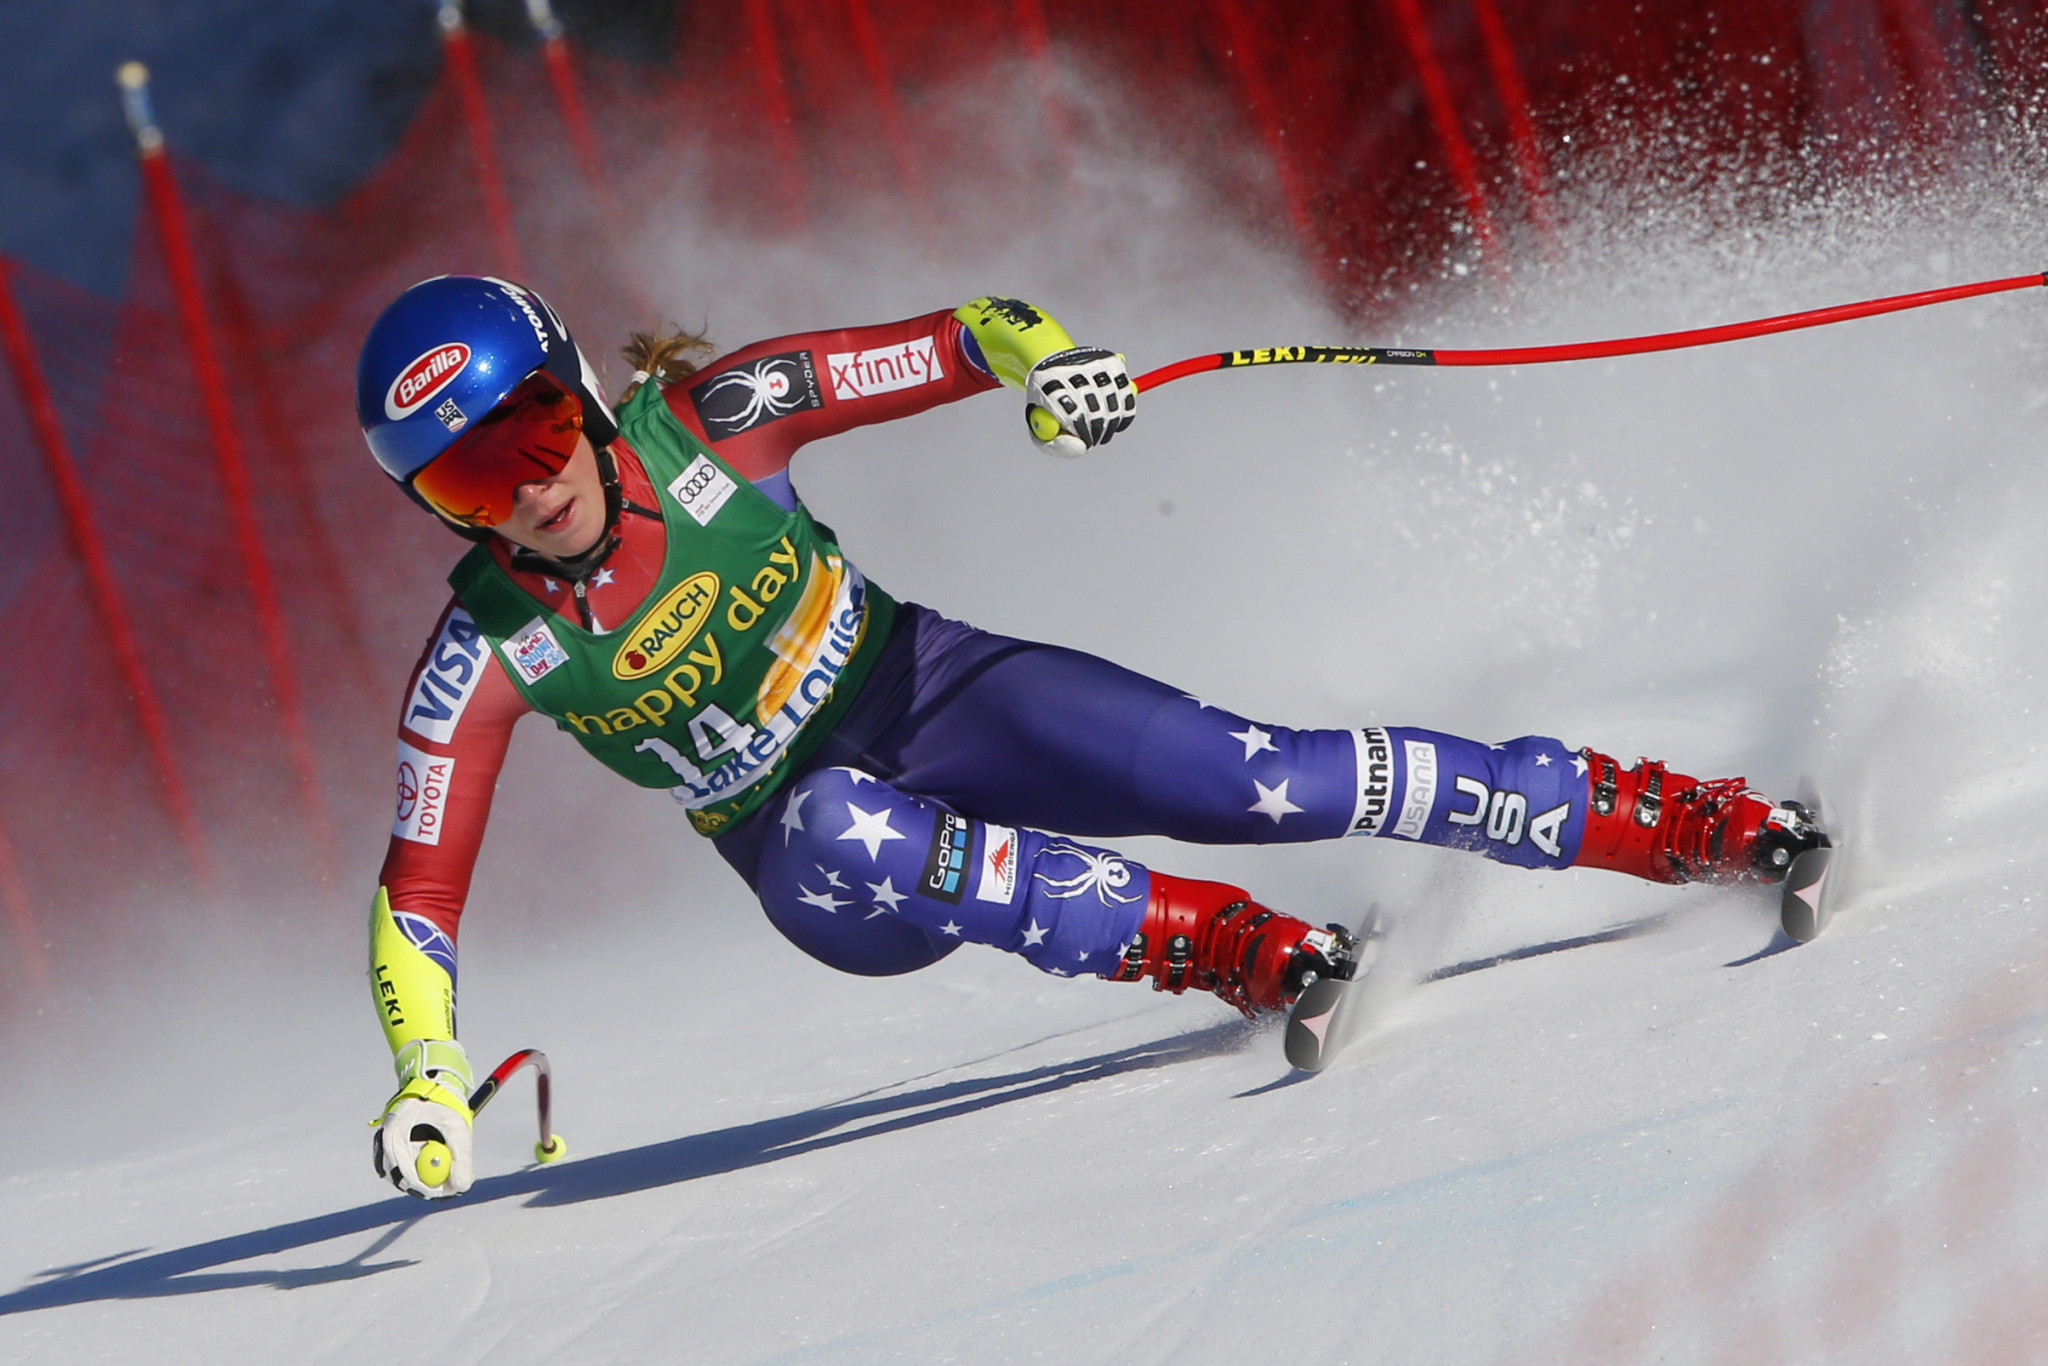 Mikaela Shiffrin is the current overall leader in the women's event ©Getty Images